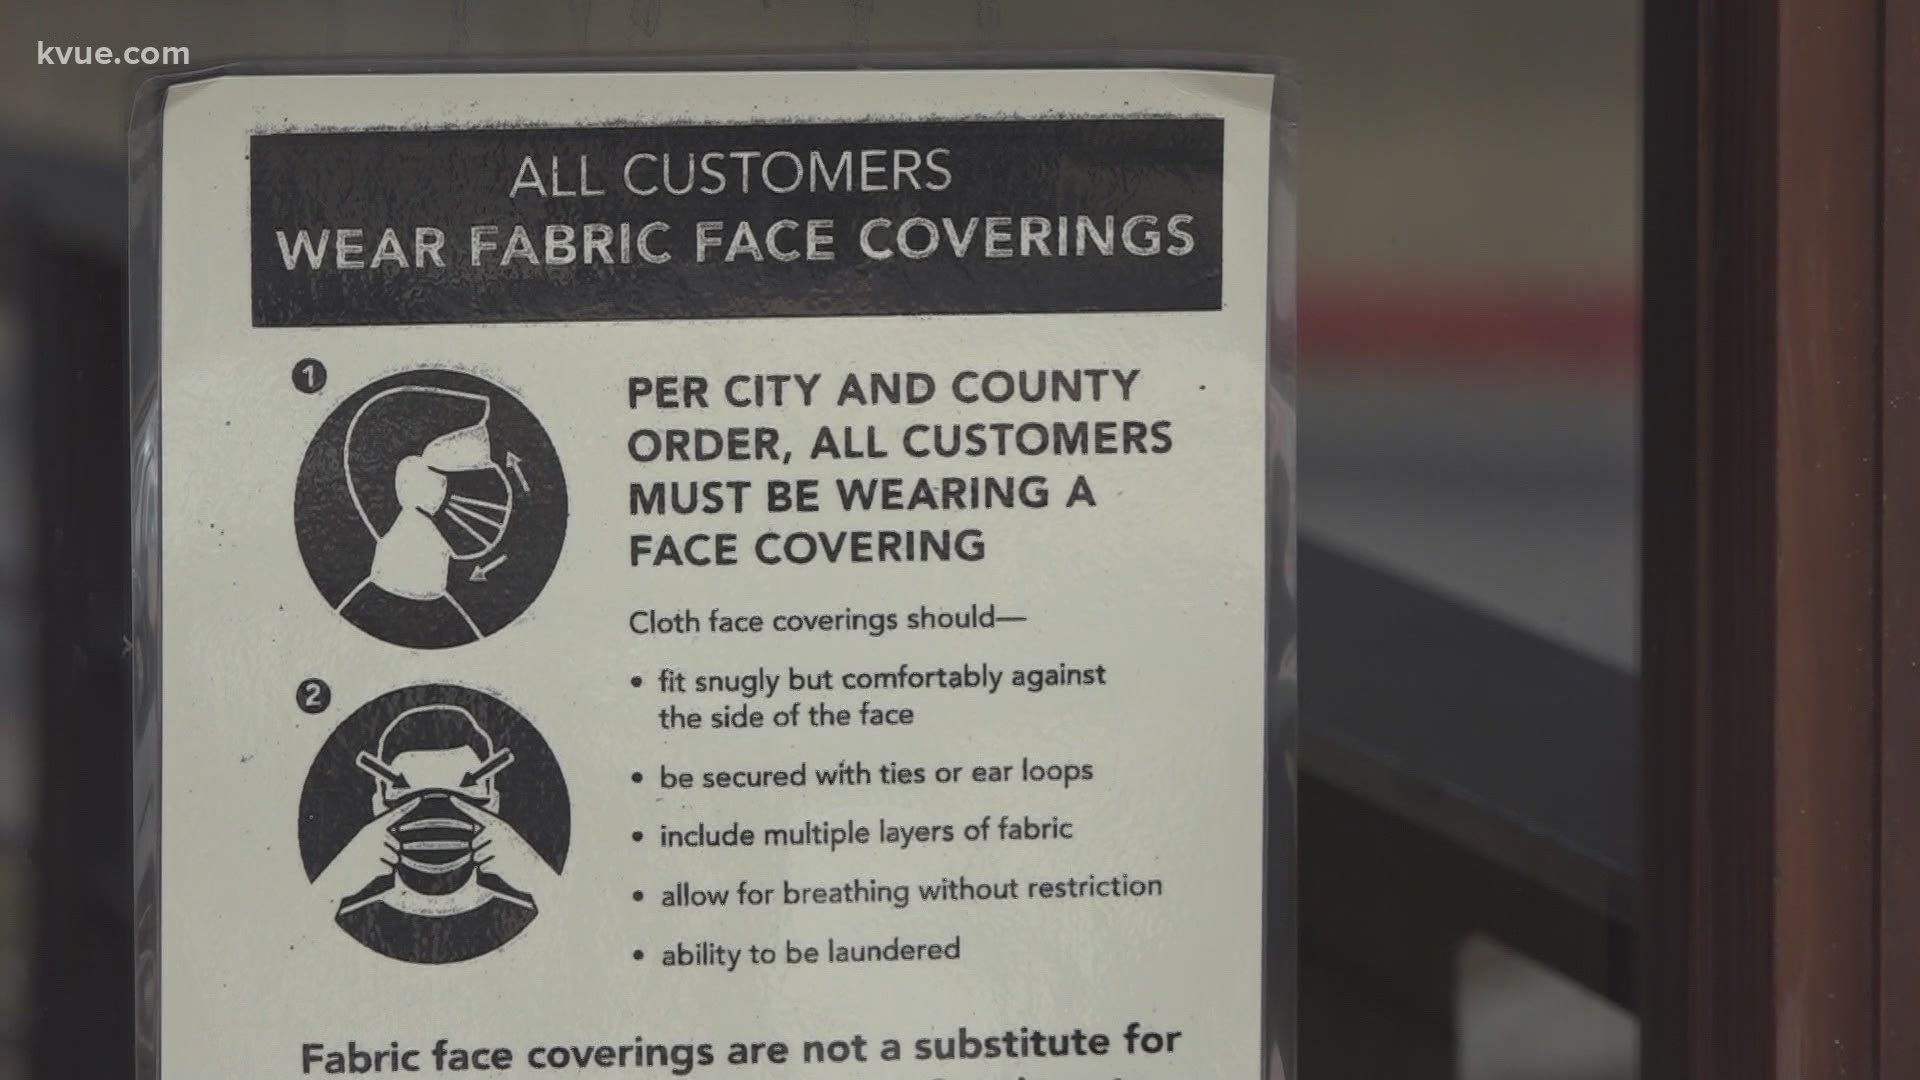 Under the mask mandate, Austin-Travis County require a mask for anyone older than 10 years old.